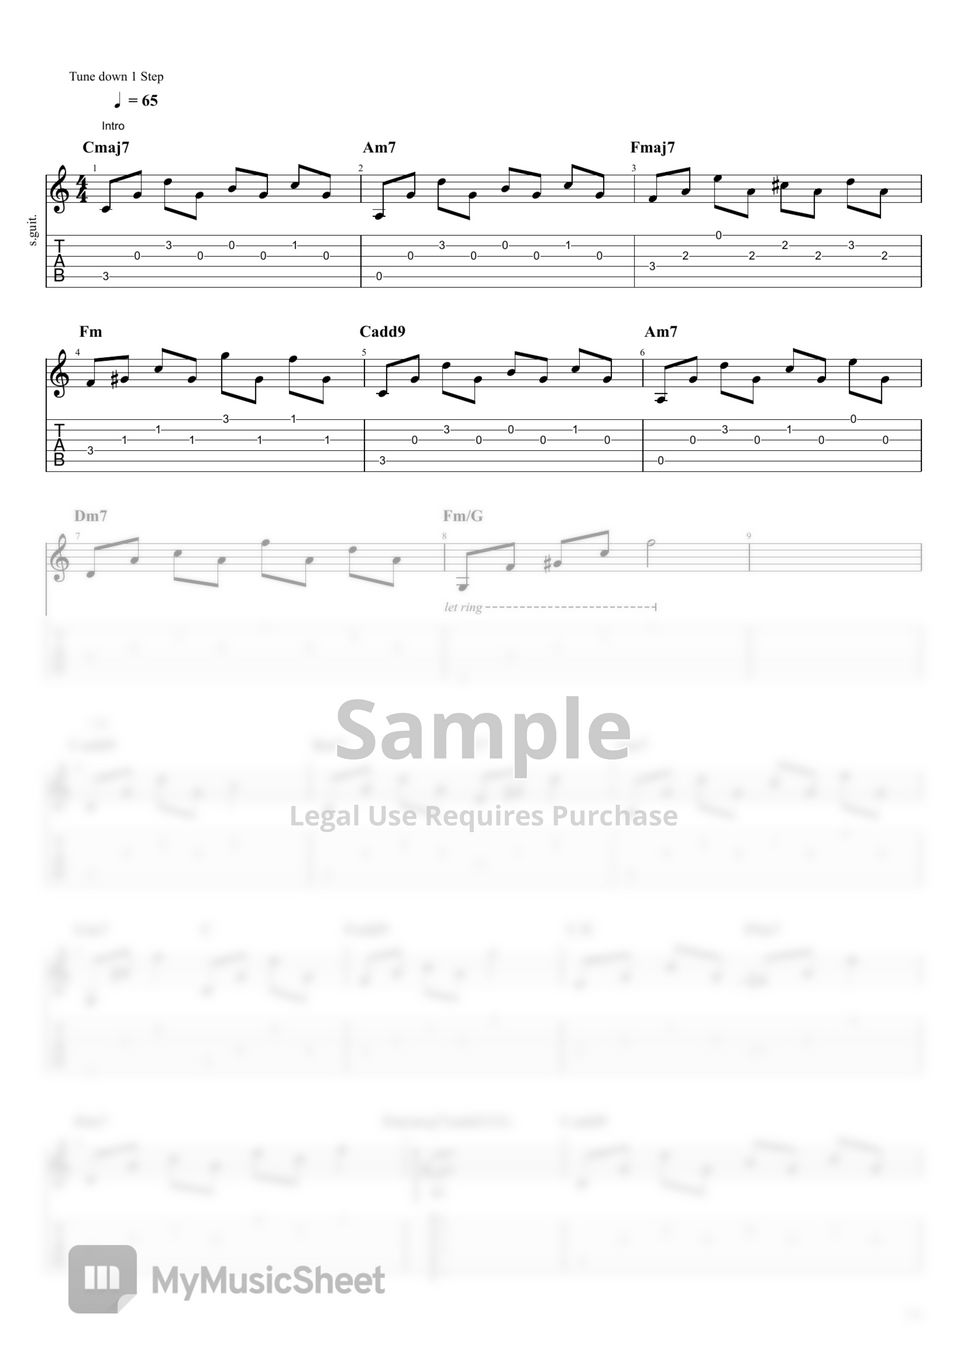 Crowd Lu - Your Name Engraved Herein (Guitar tab C Key) by Ash